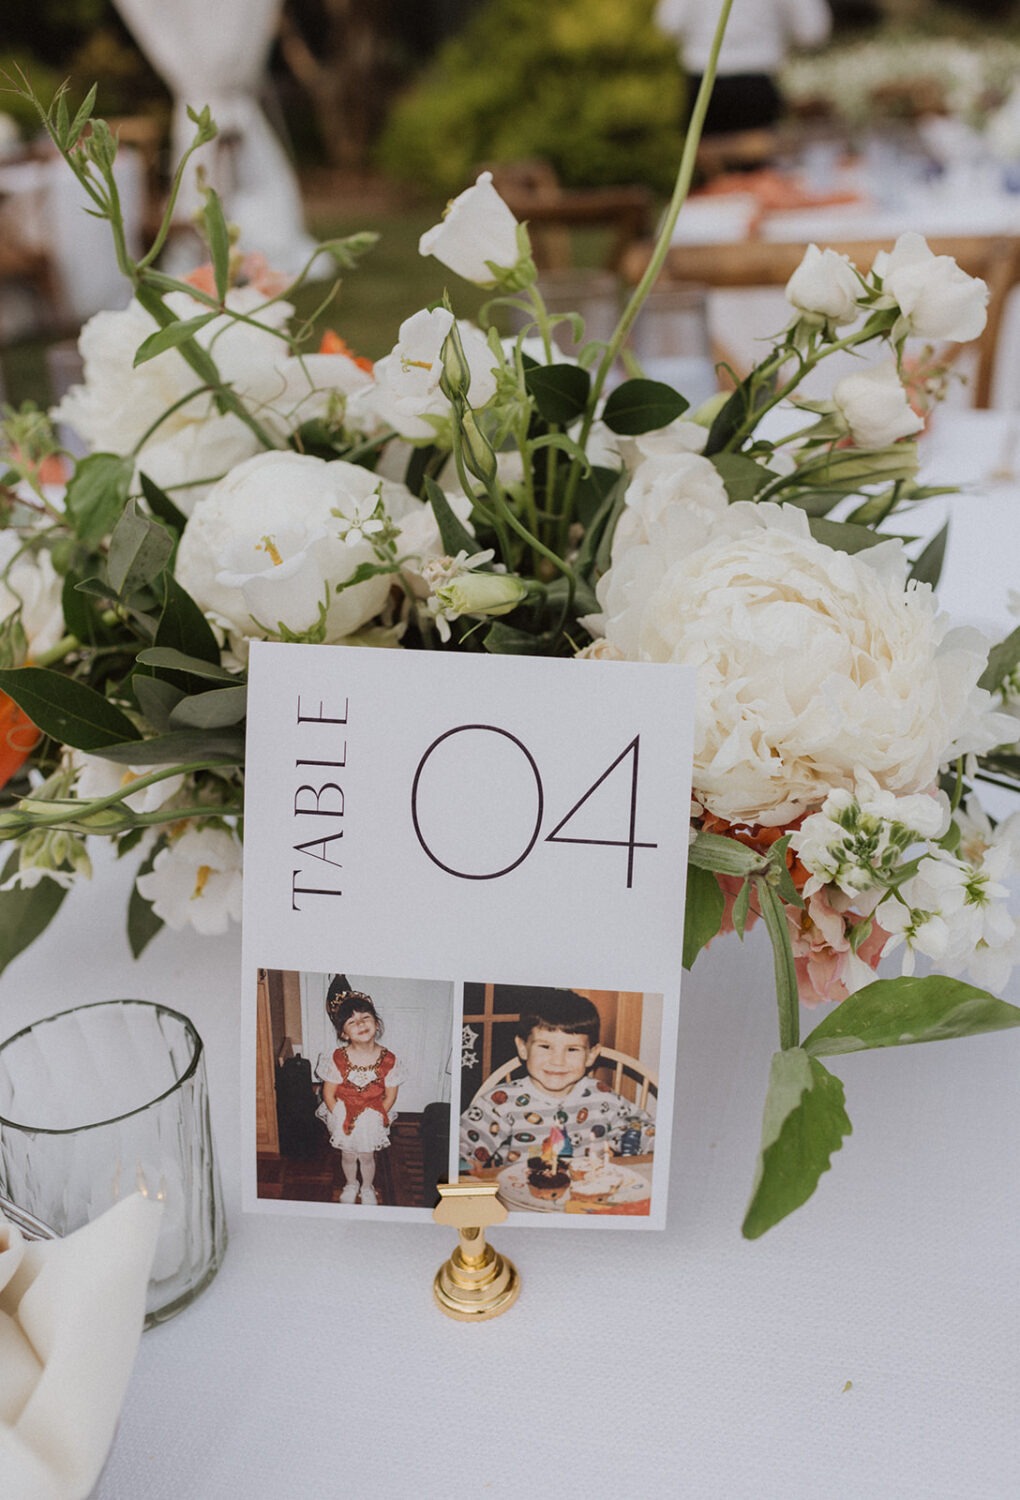 white florals and table numbers with photos at DIY wedding